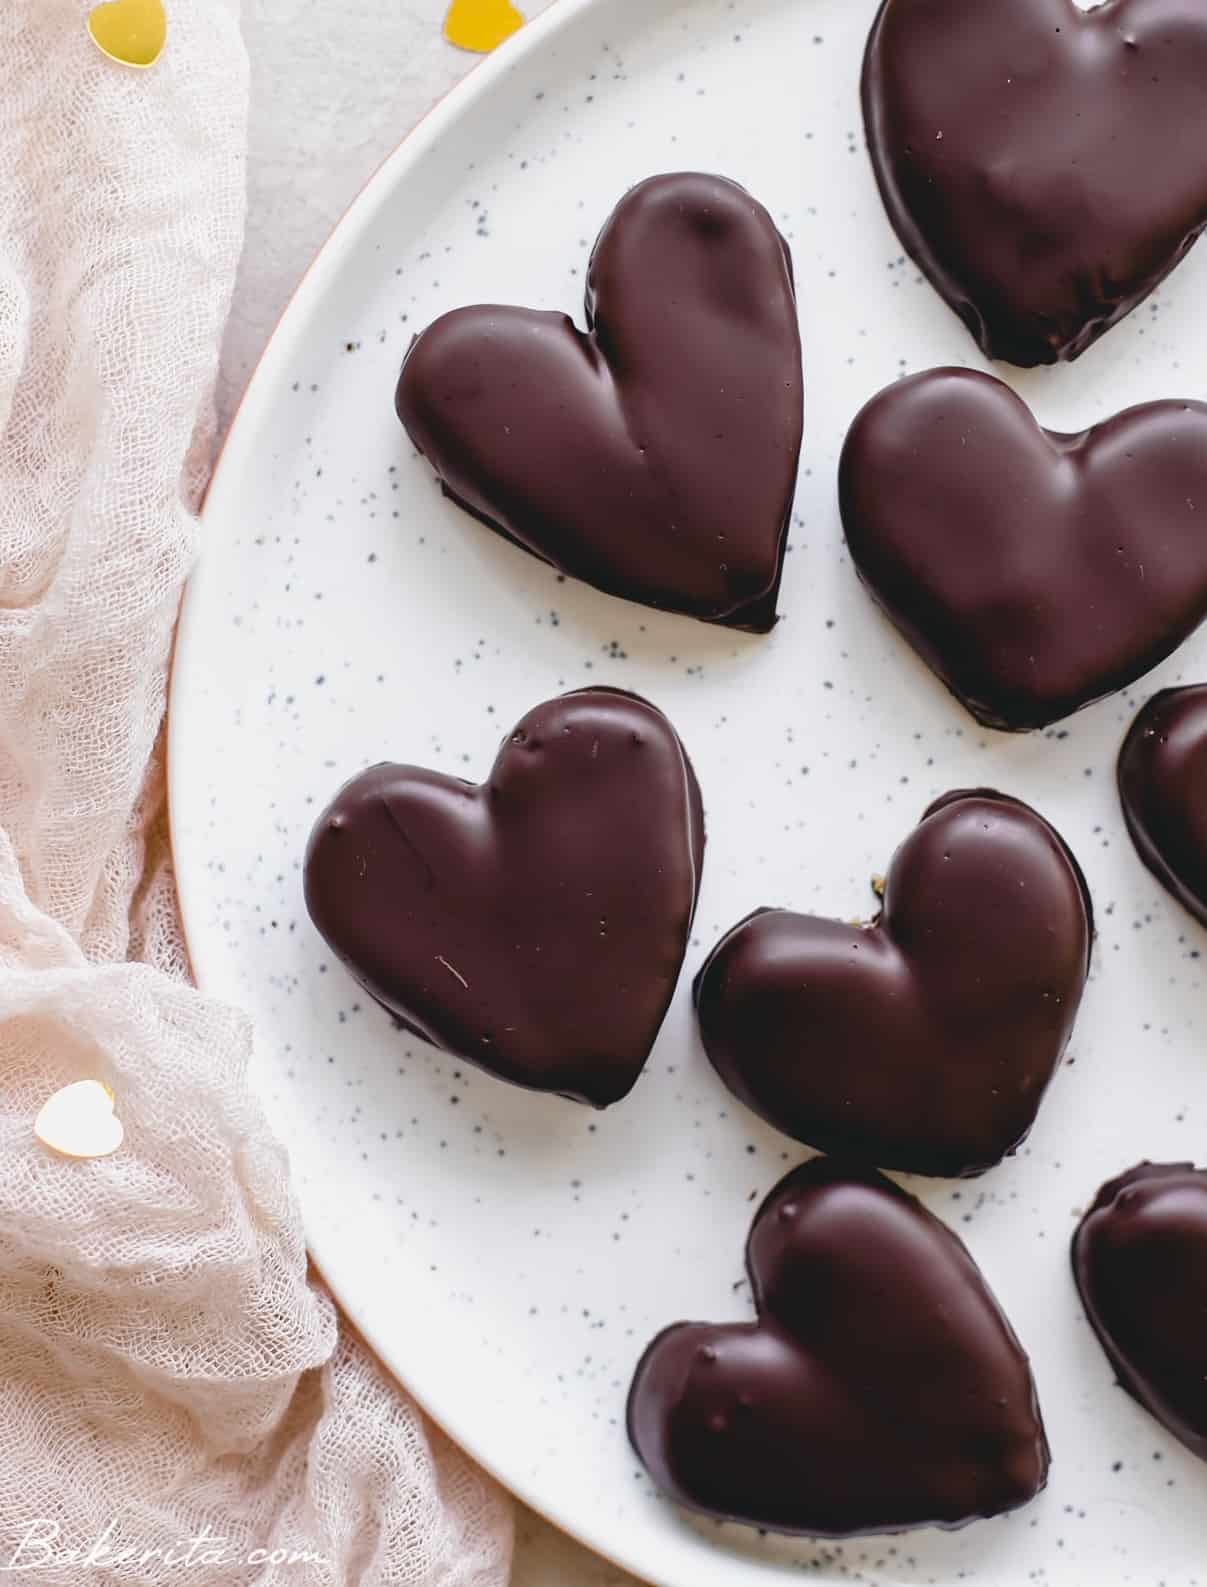 Chocolate and peanut butter hearts.